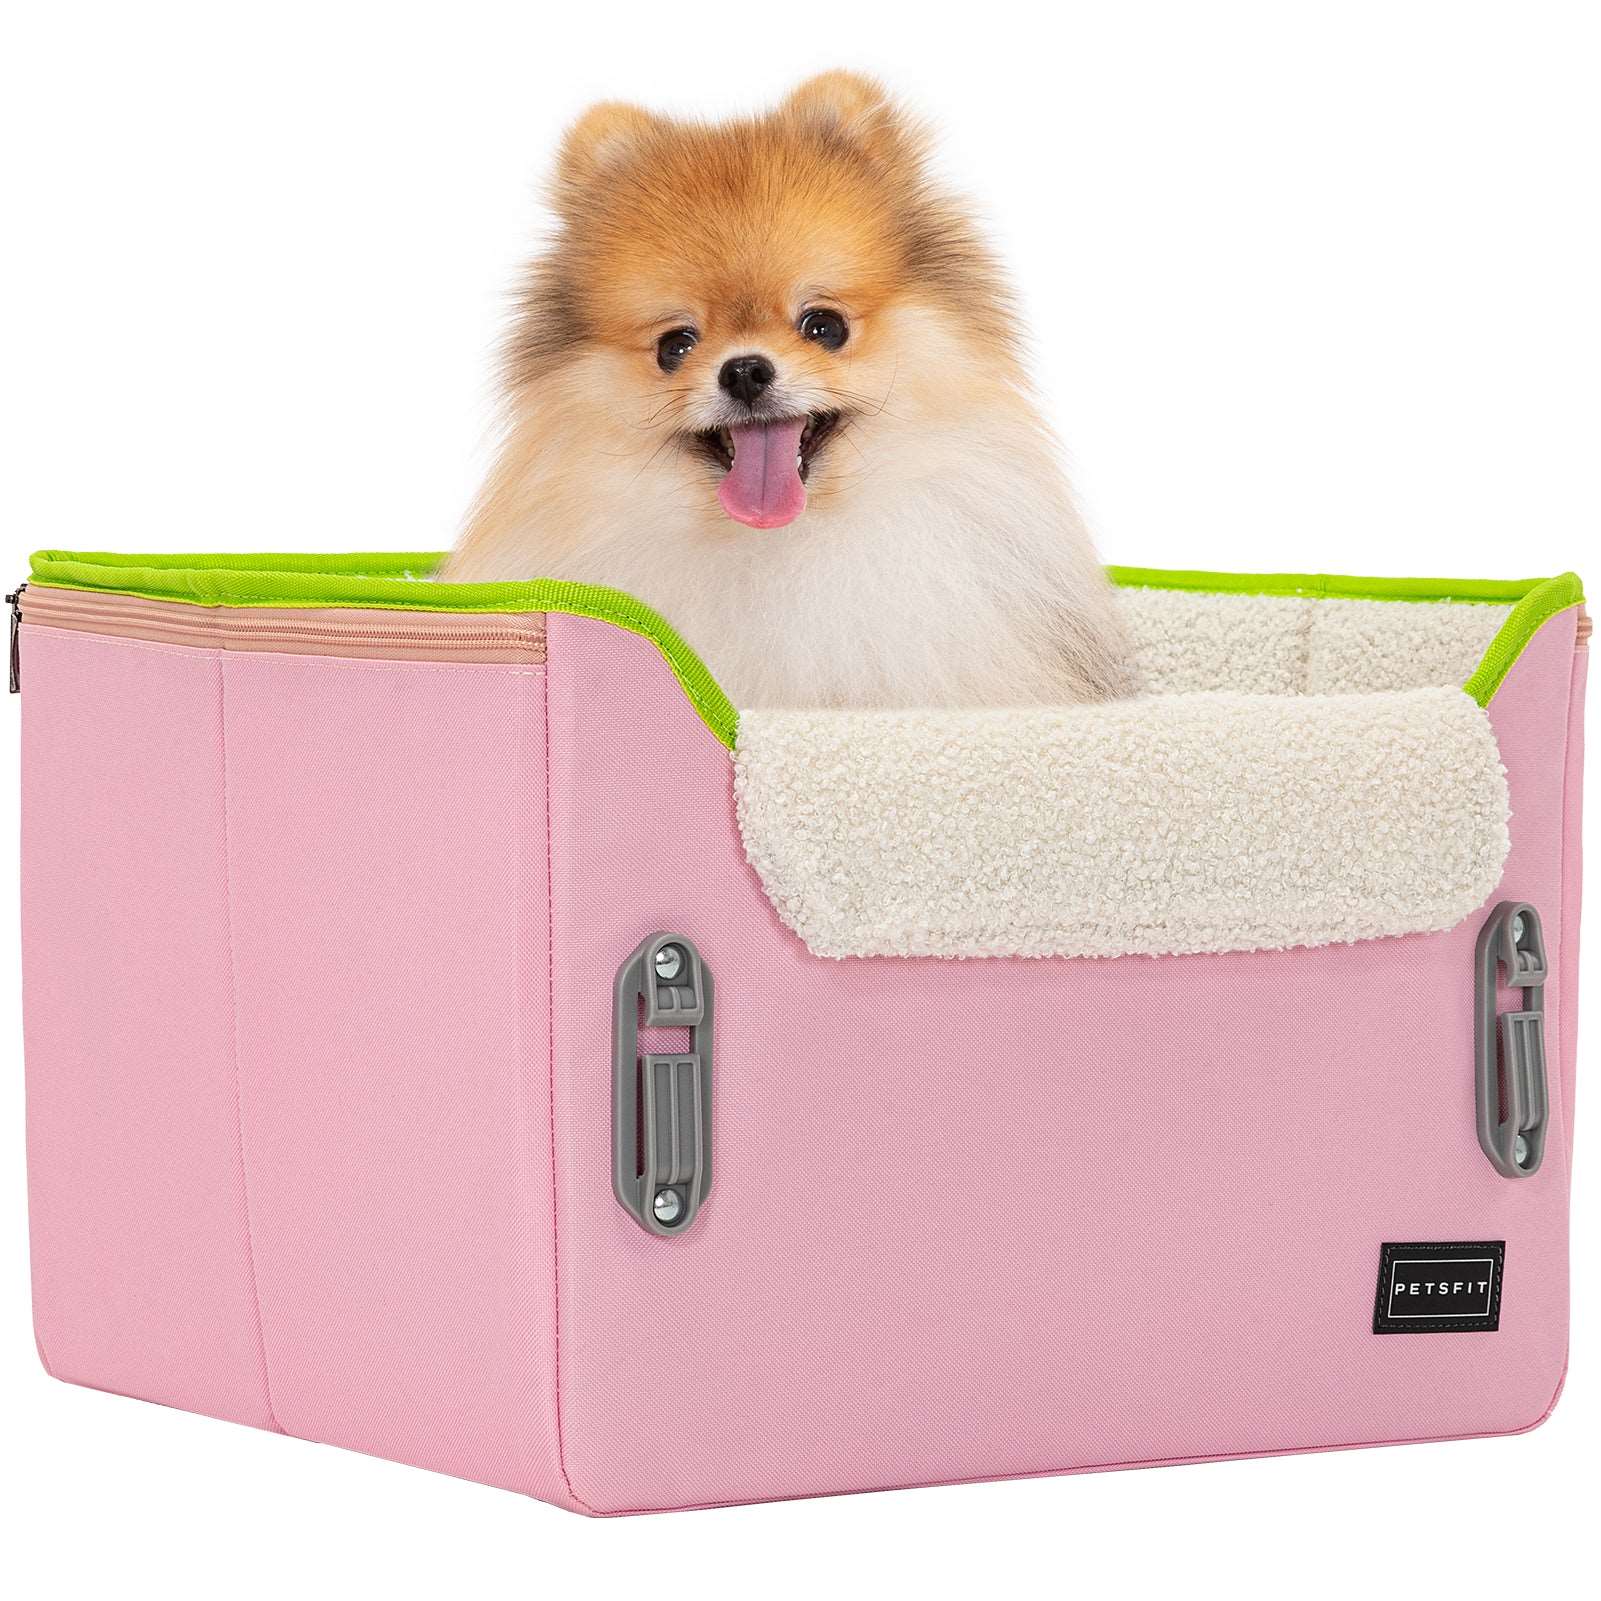 PETSFIT-Dog-Car-Seats-for-Small-Dogs-Puppy-Stable-Pet-Car-Seat-10